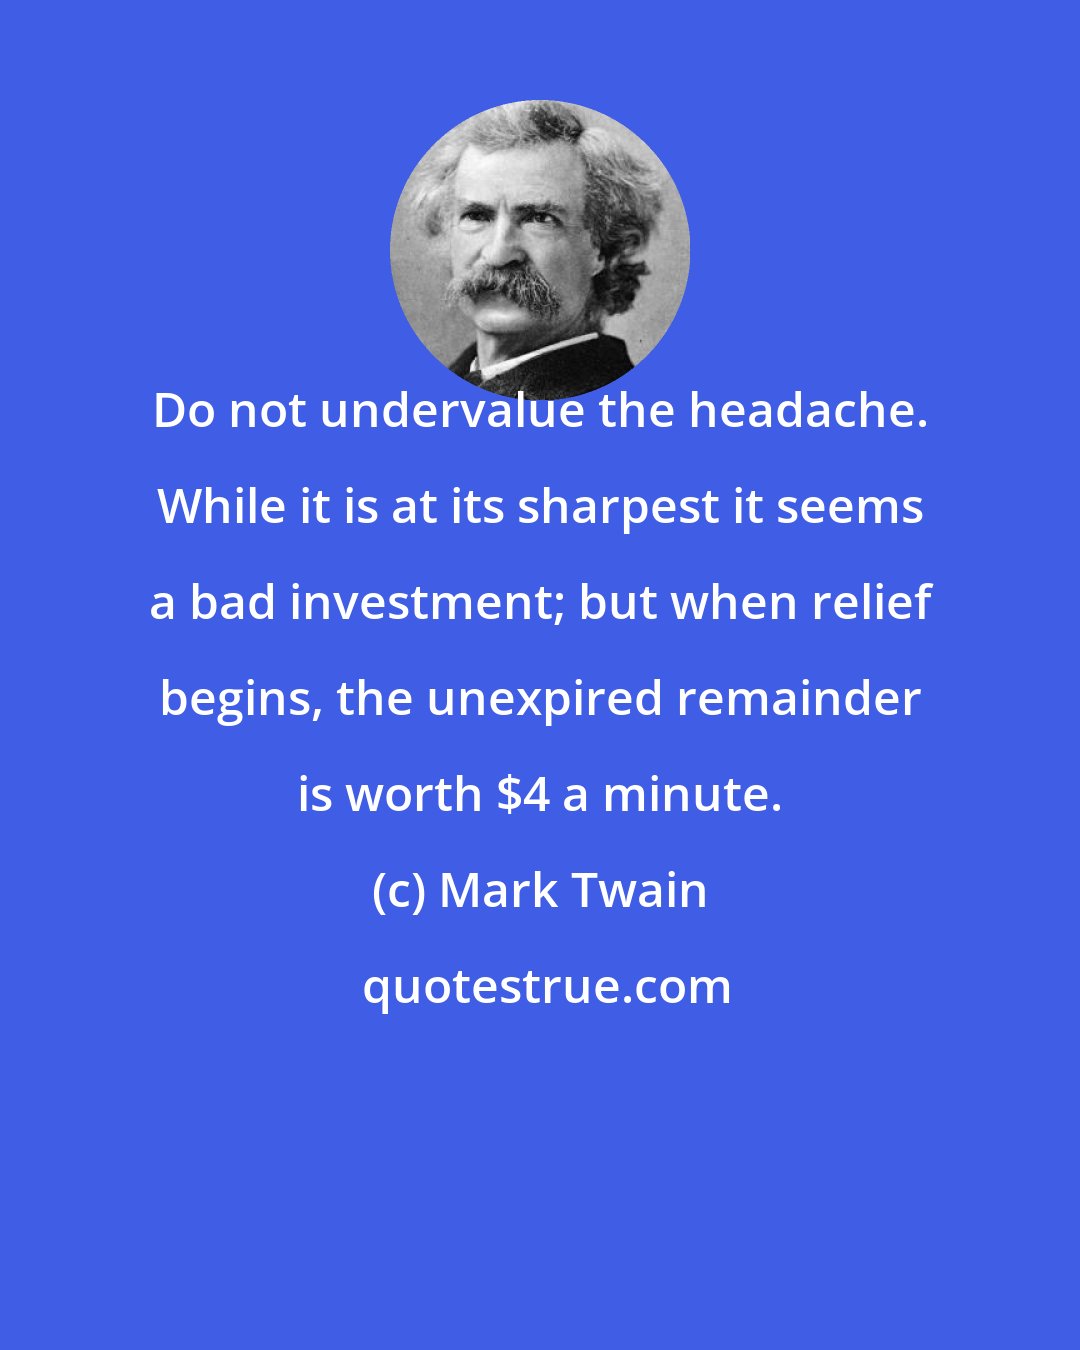 Mark Twain: Do not undervalue the headache. While it is at its sharpest it seems a bad investment; but when relief begins, the unexpired remainder is worth $4 a minute.